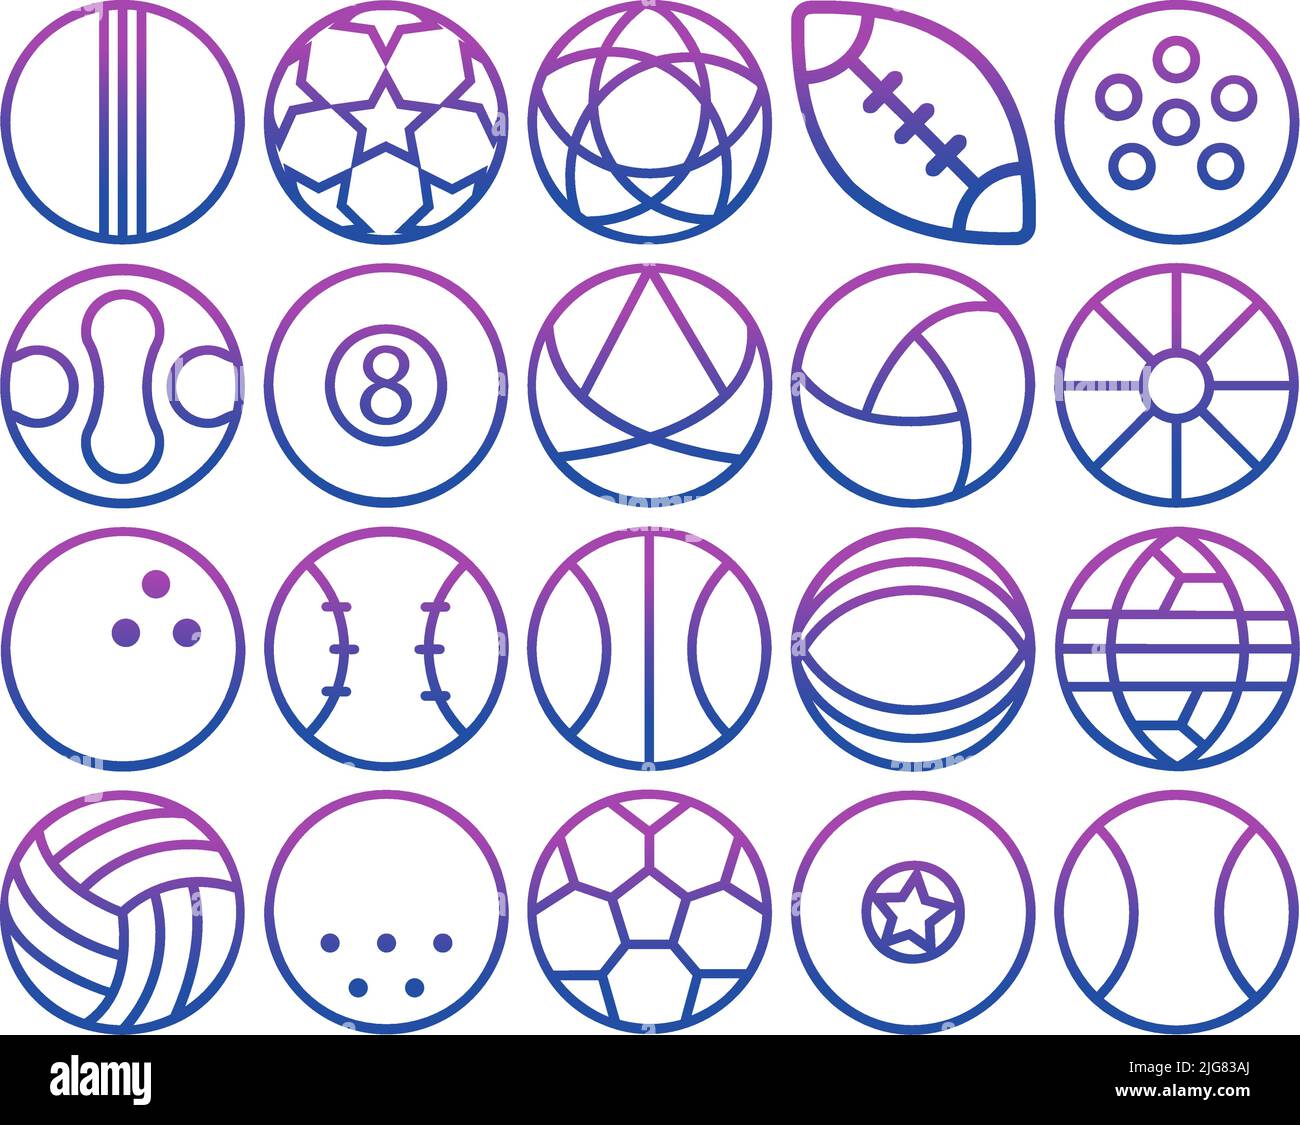 20 Outlined icon pack. Different balls. Sport icons Stock Vector